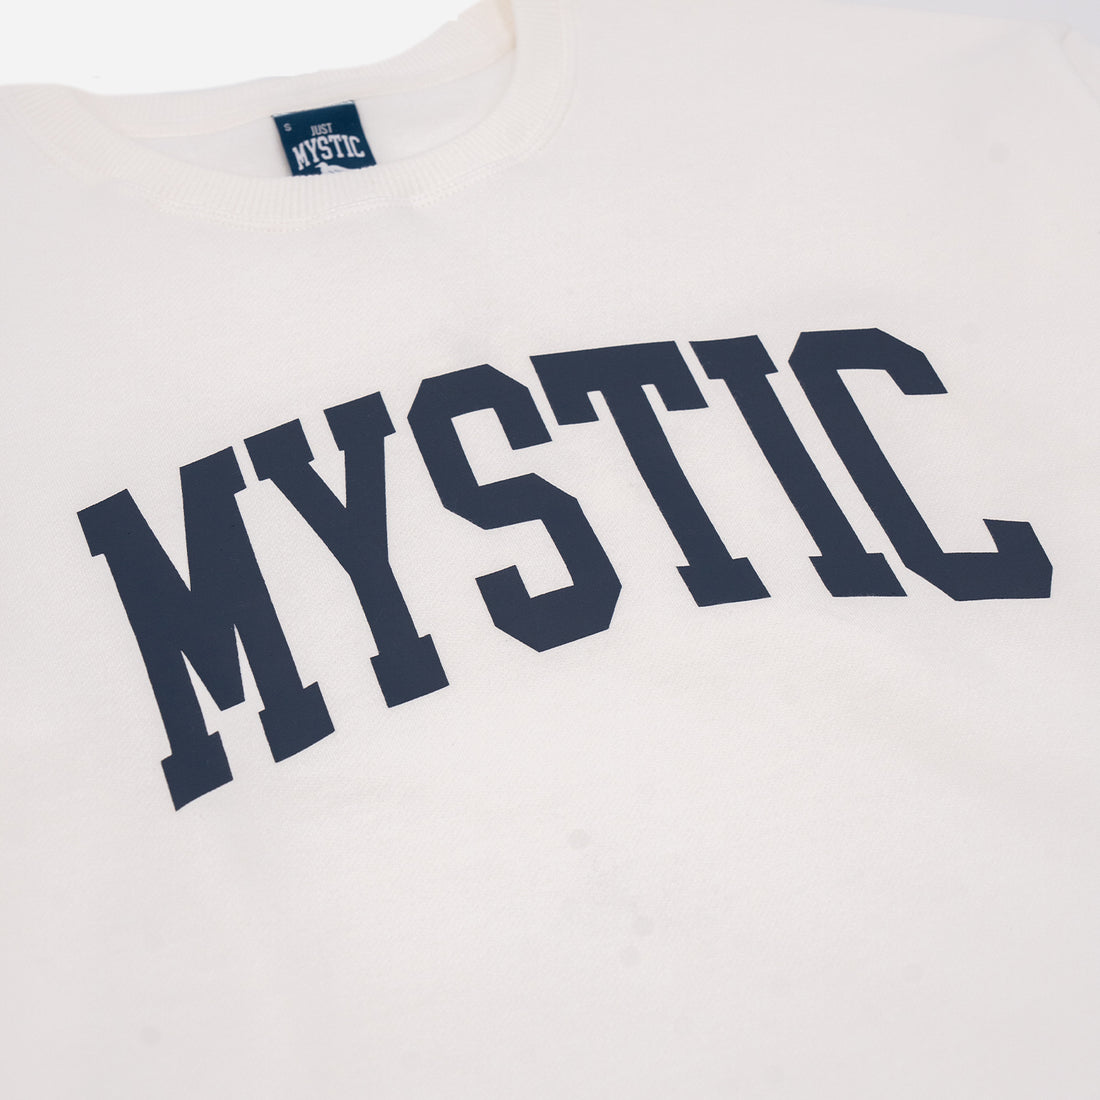 Mystic Crewneck in Oyster White